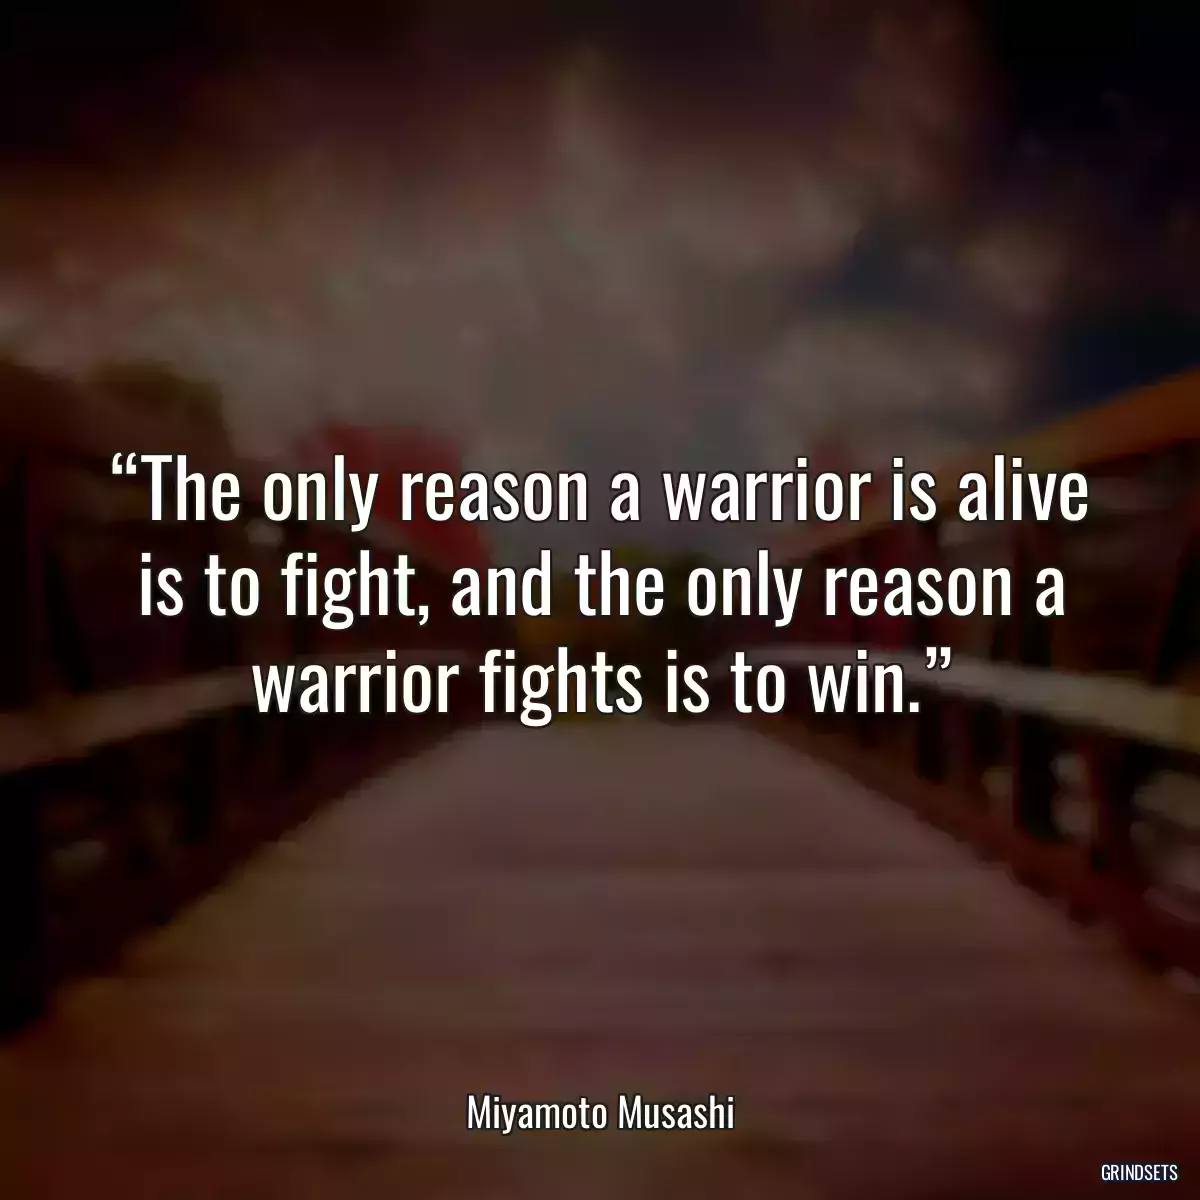 “The only reason a warrior is alive is to fight, and the only reason a warrior fights is to win.”